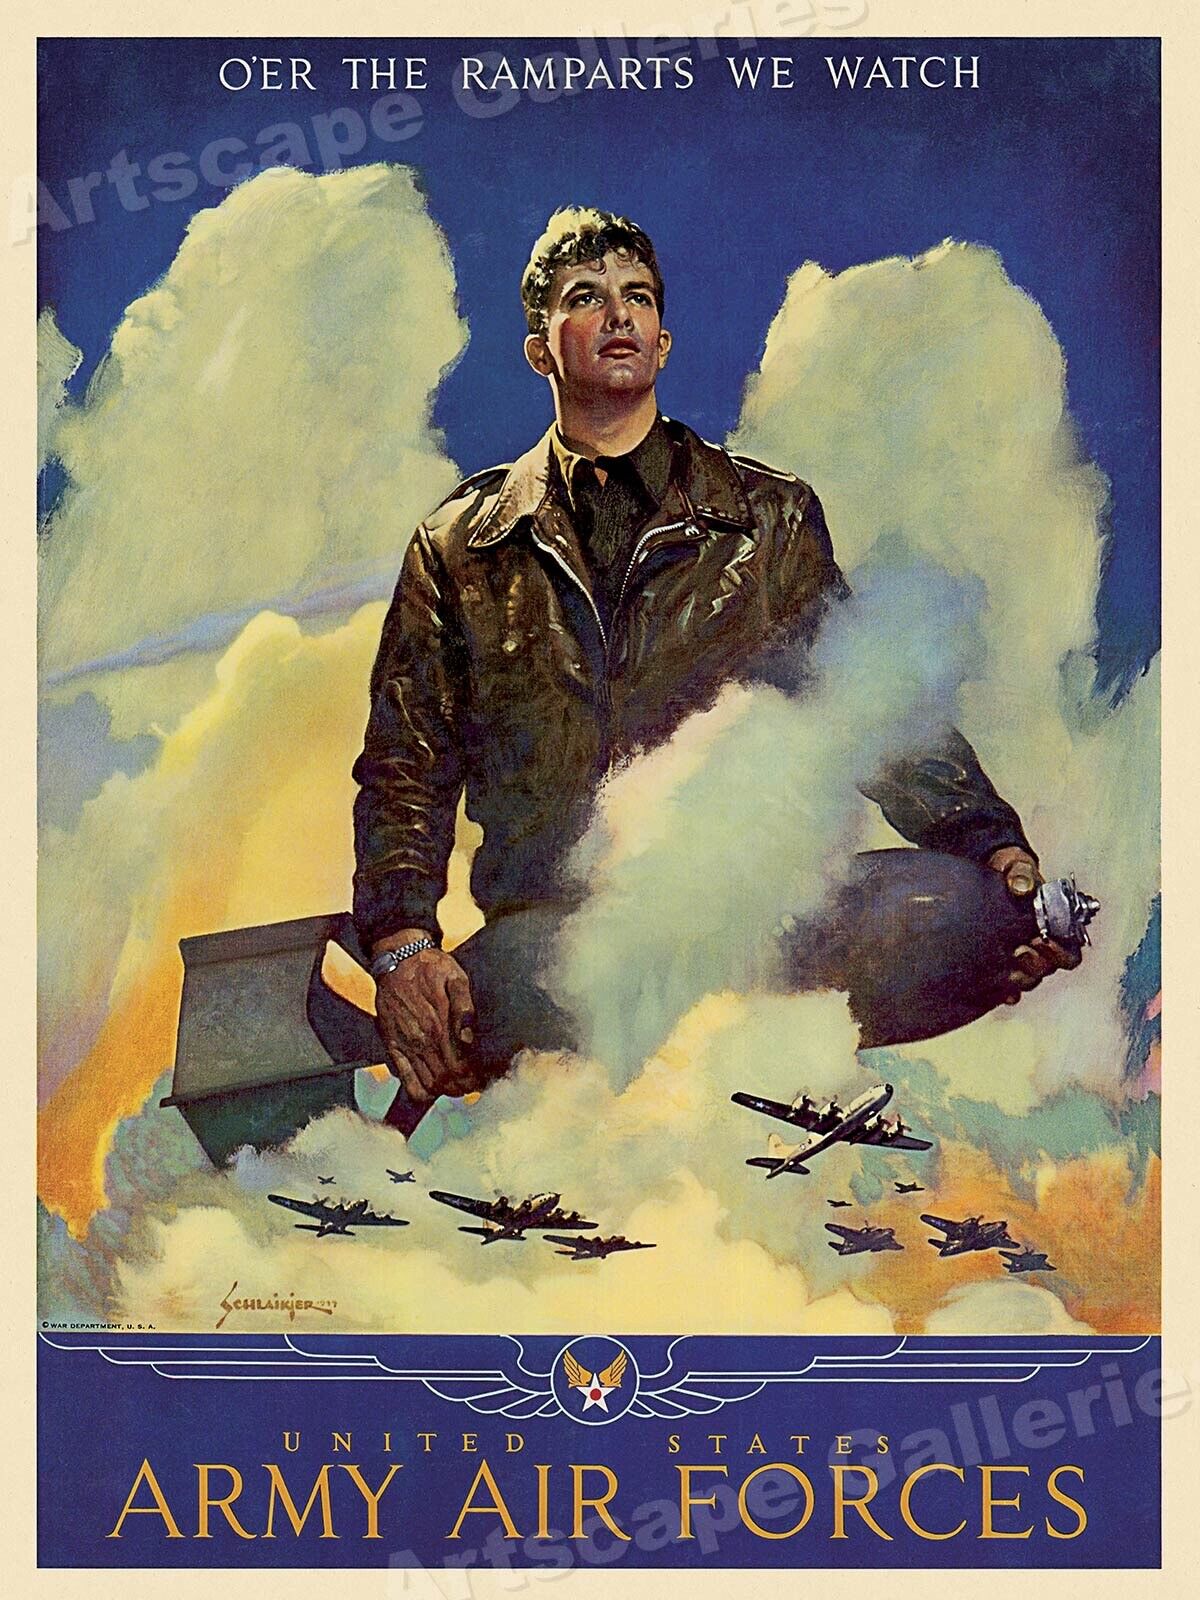 1945 Army Air Forces Bomber Pilot WW2 Vintage Style Poster - 24x32